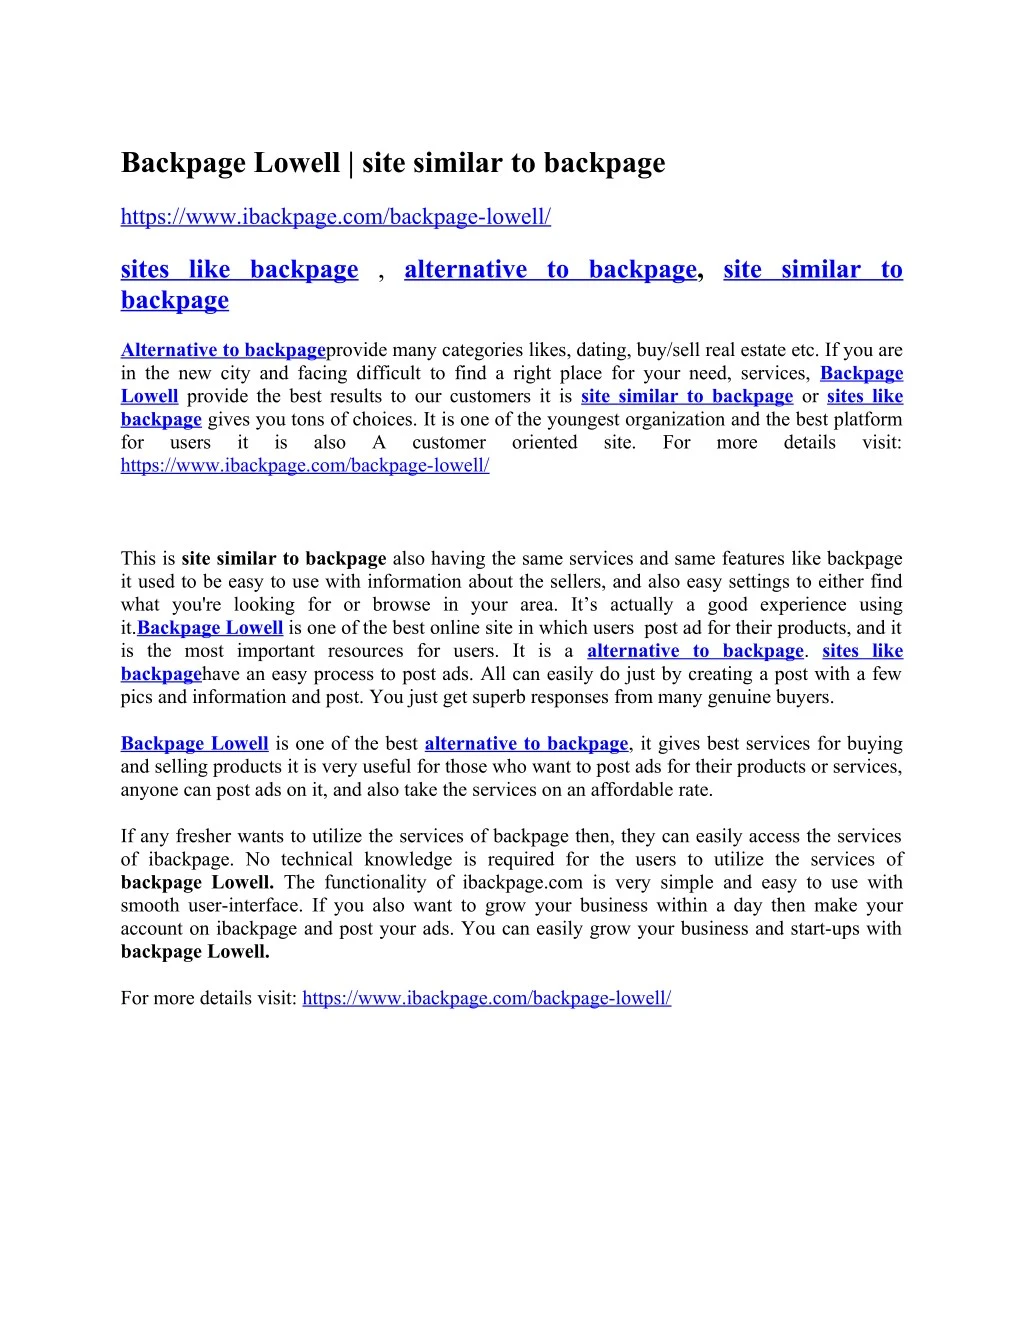 backpage lowell site similar to backpage